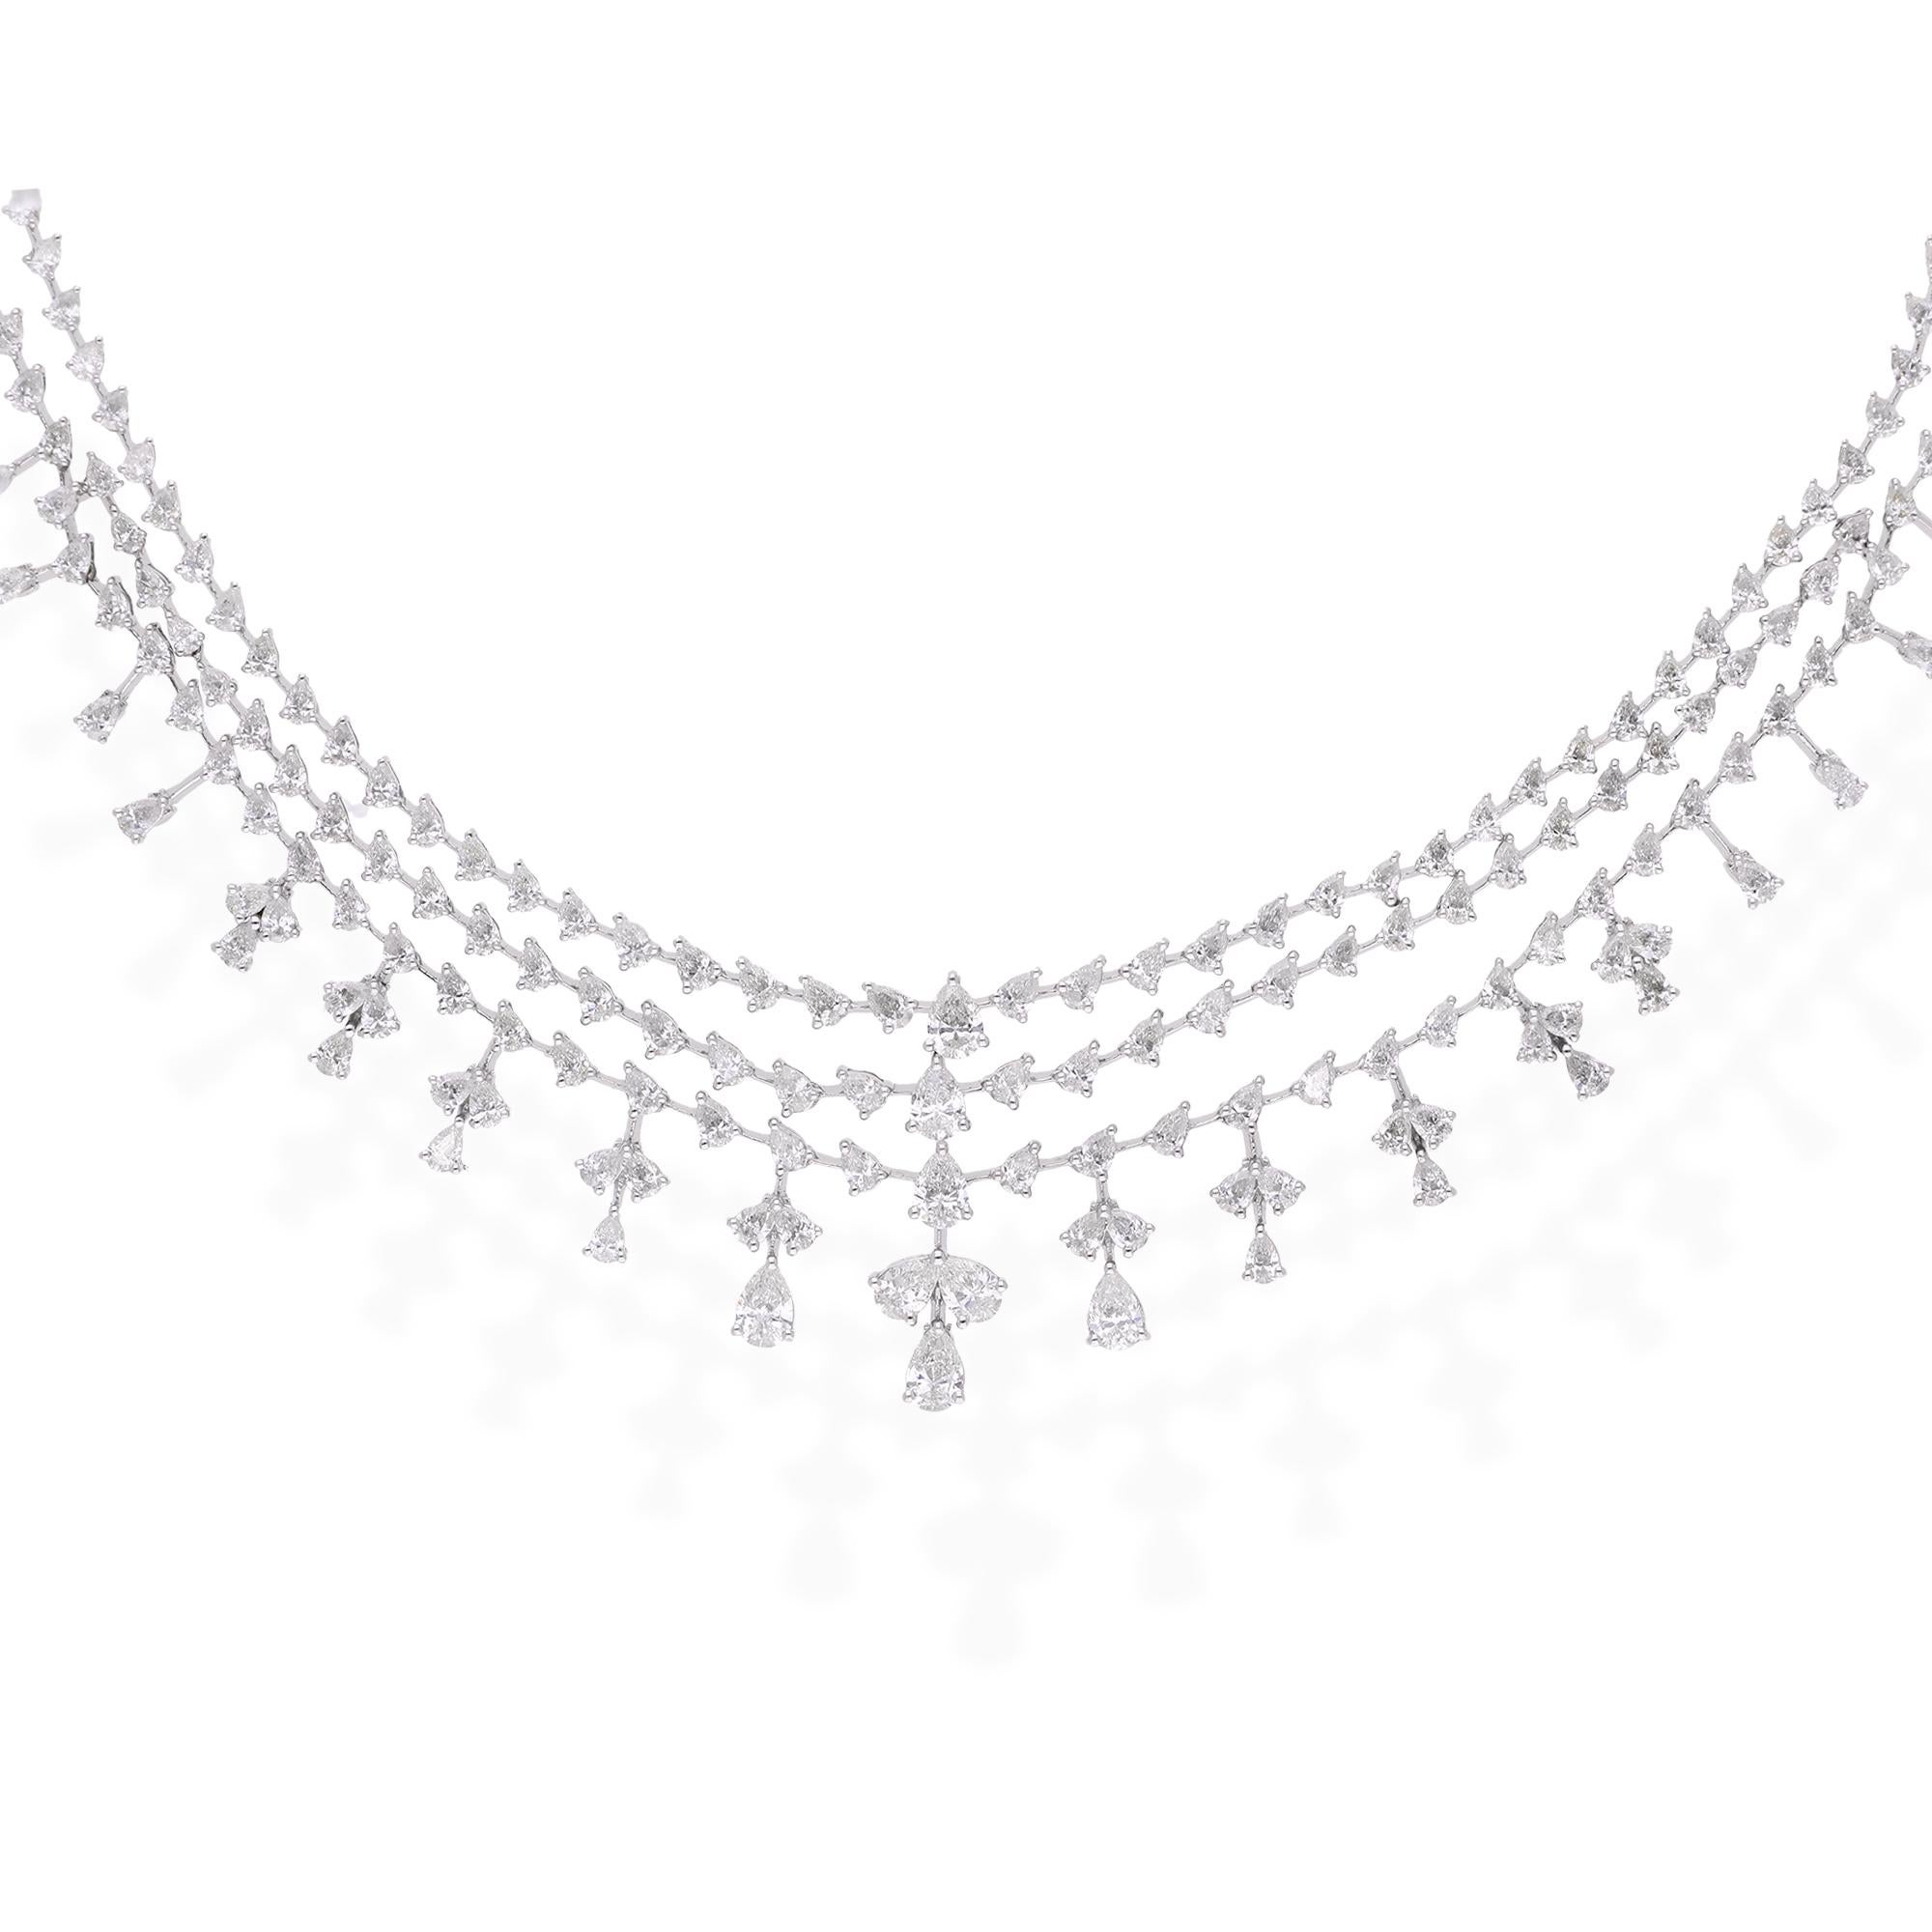 The focal point of this necklace is the dazzling pear-cut diamond, carefully selected for its exceptional clarity and brilliance. Graced with SI clarity and an HI color grade, the diamond sparkles with every movement, capturing the light and